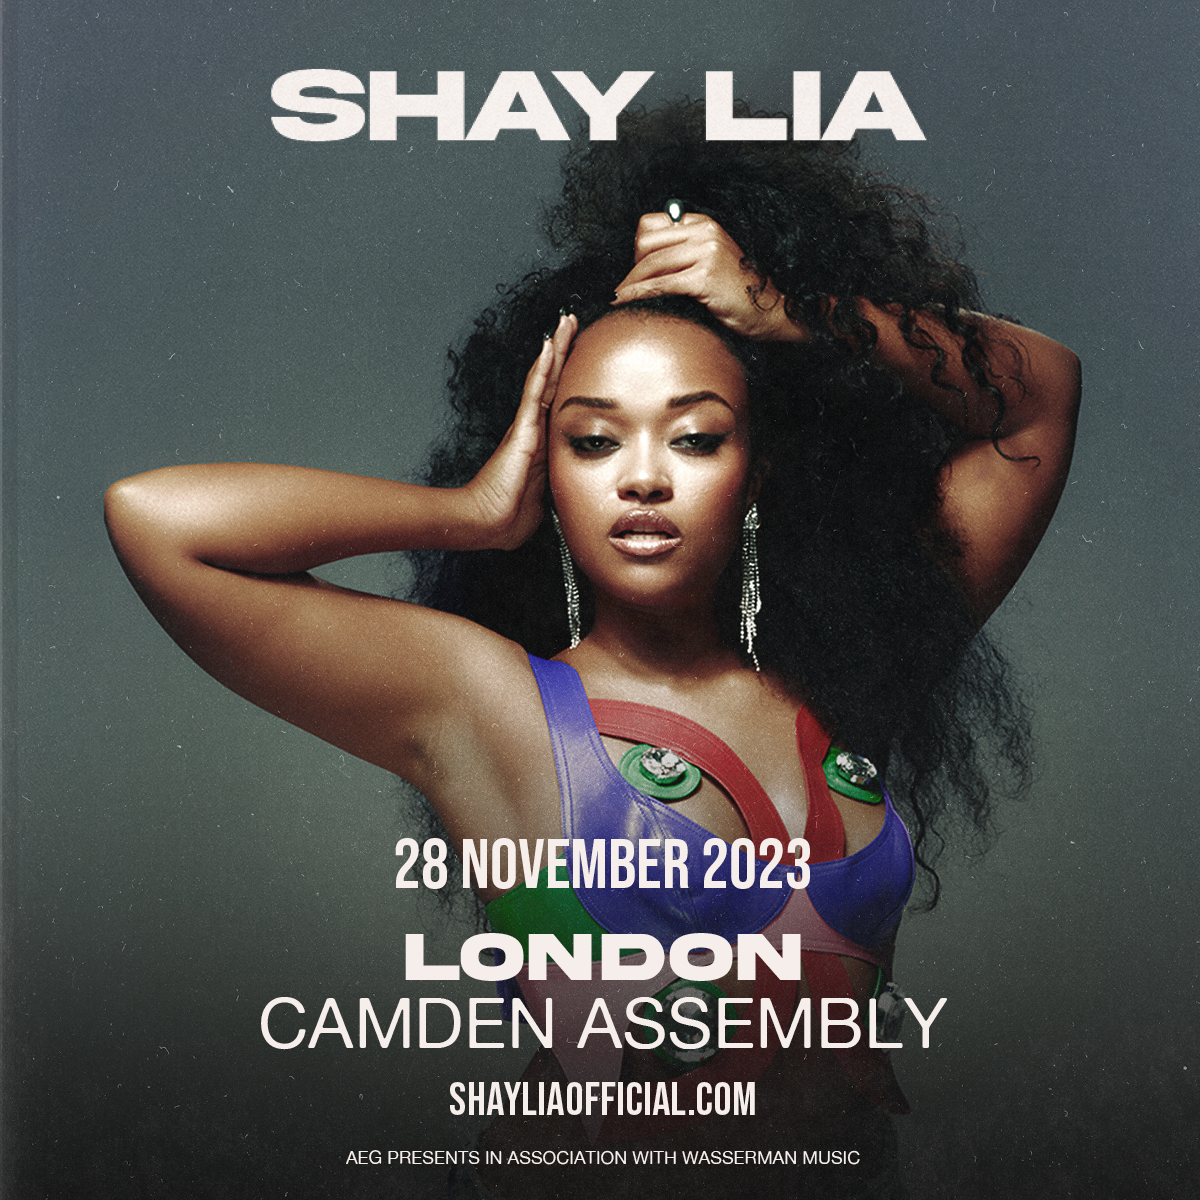 JUST ANNOUNCED! Excited to have @ShayLia_ join us at The Camden Assembly this November 28th for a special headline show. Tickets go on general sale this Friday at 10am